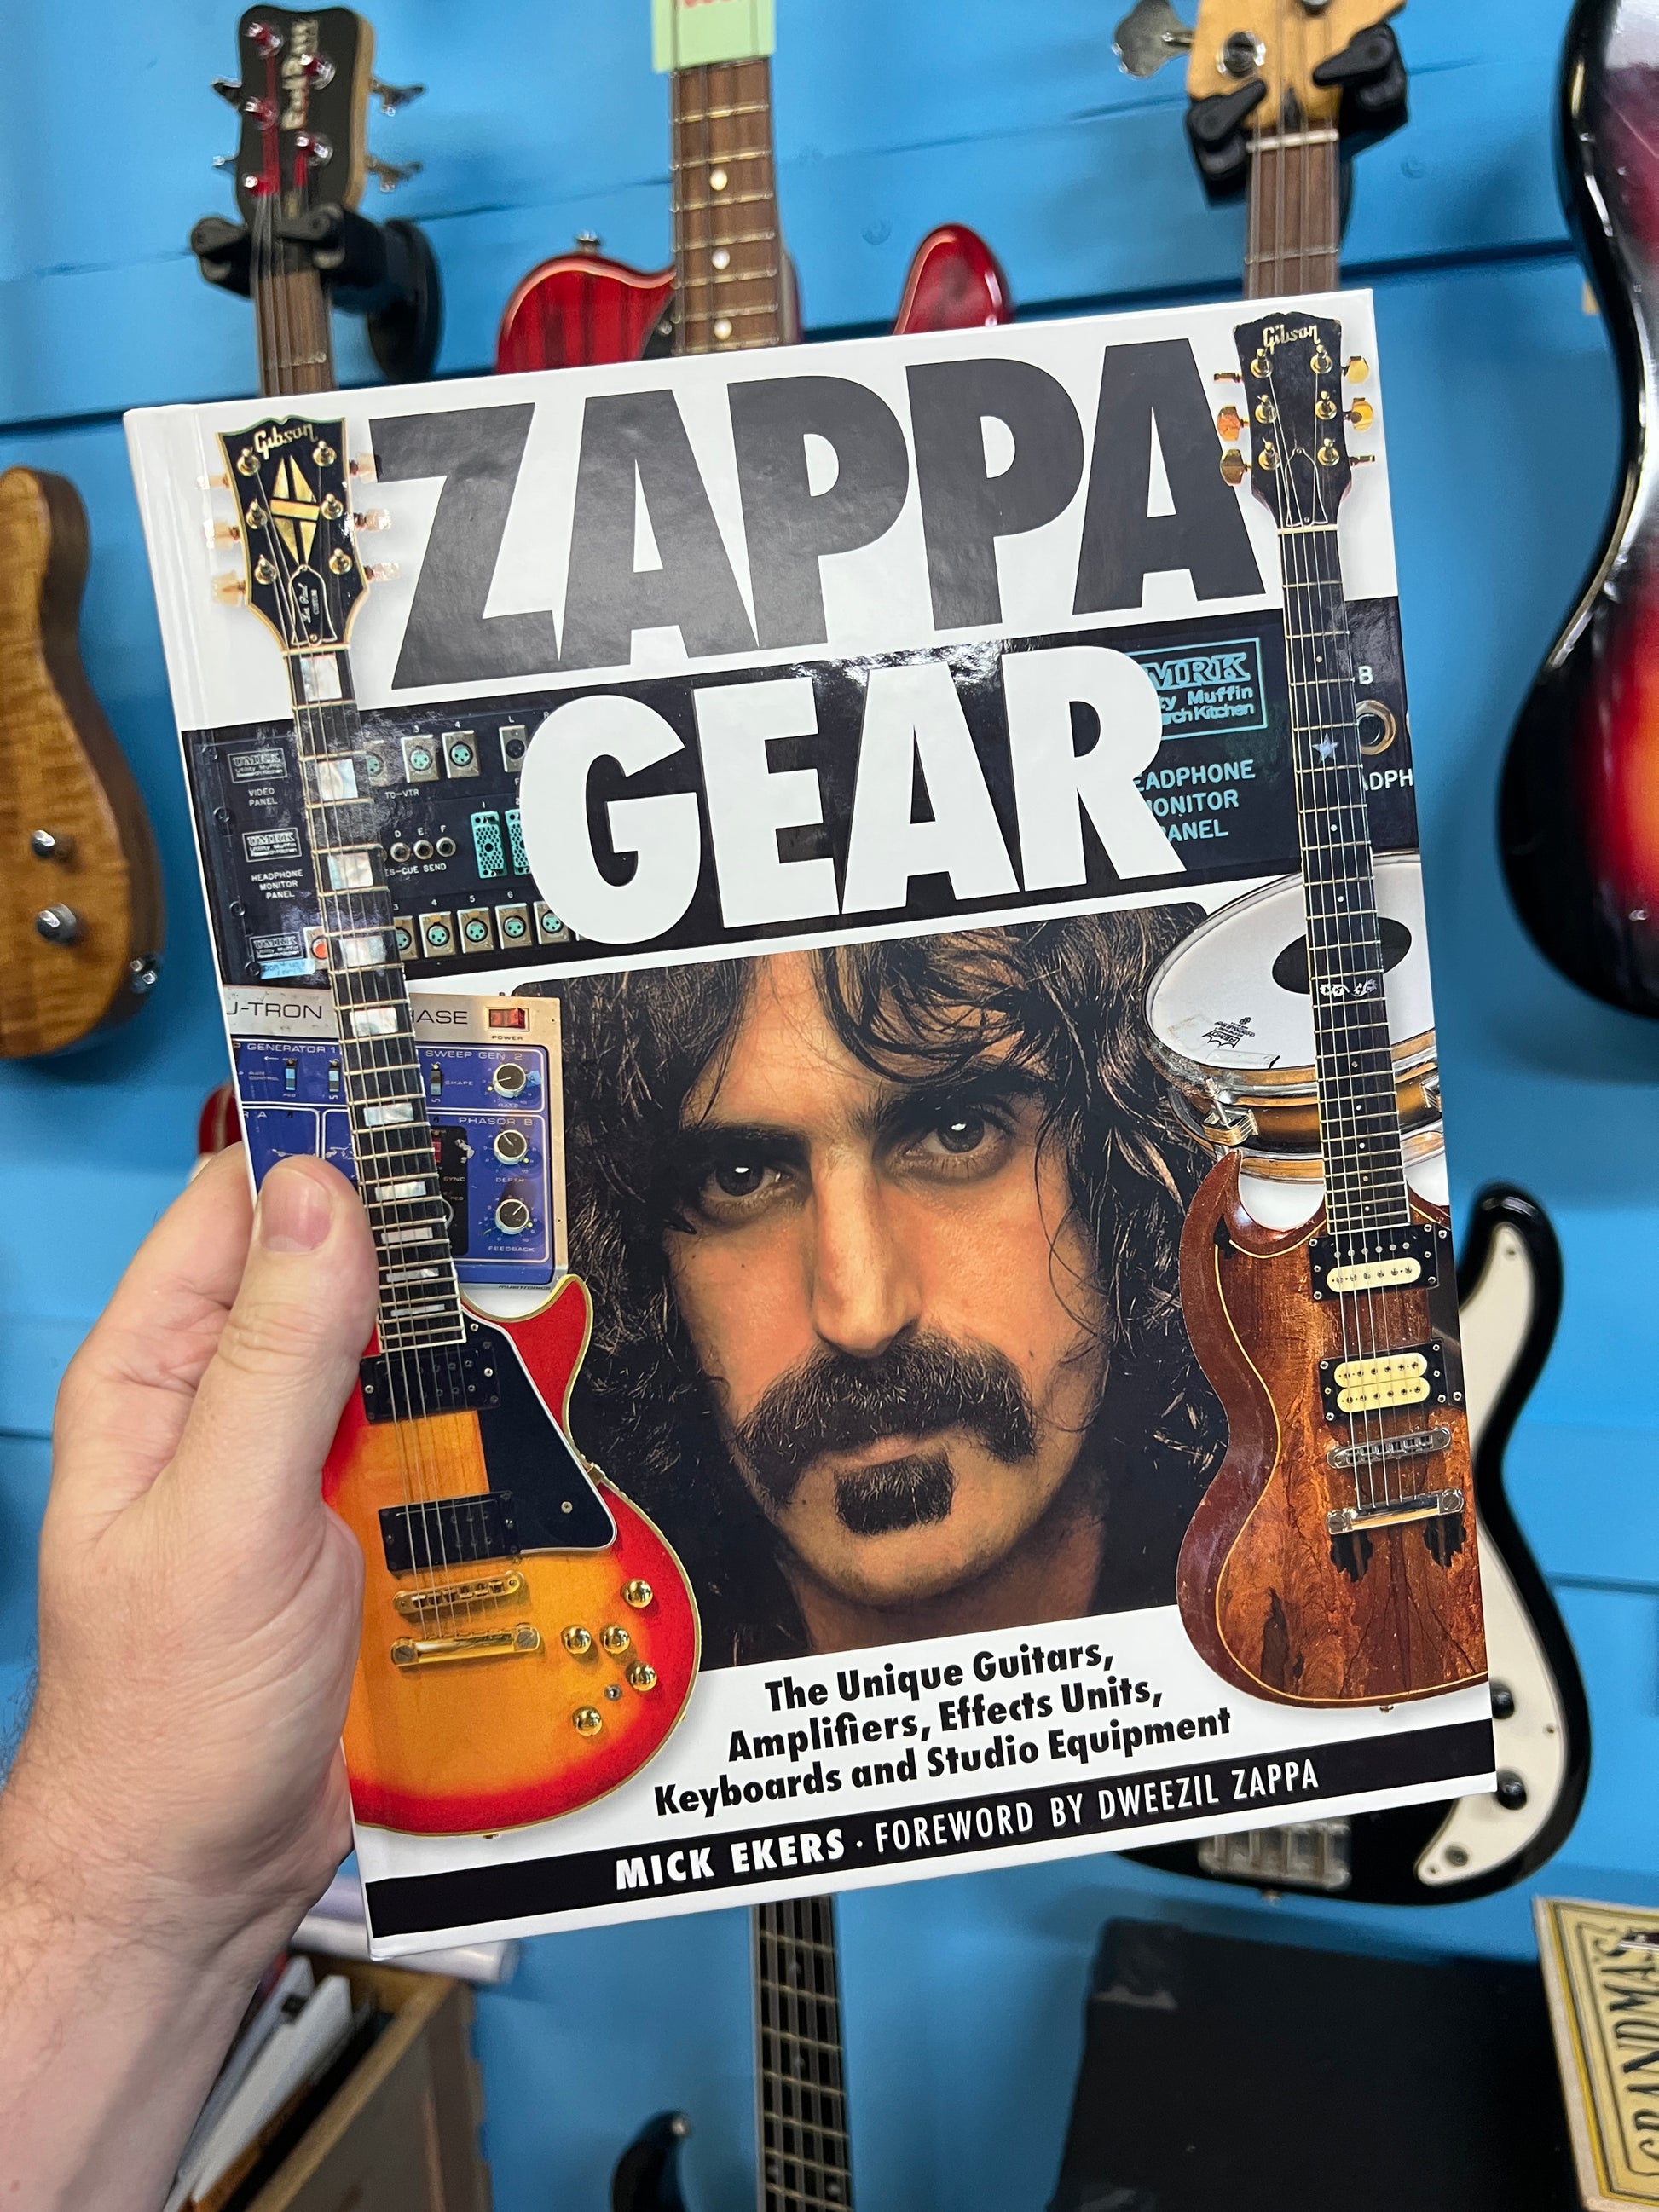 Zappa's Gear - The Unique Guitars, Amplifiers, Effects Units, Keyboards and Studio Equipment